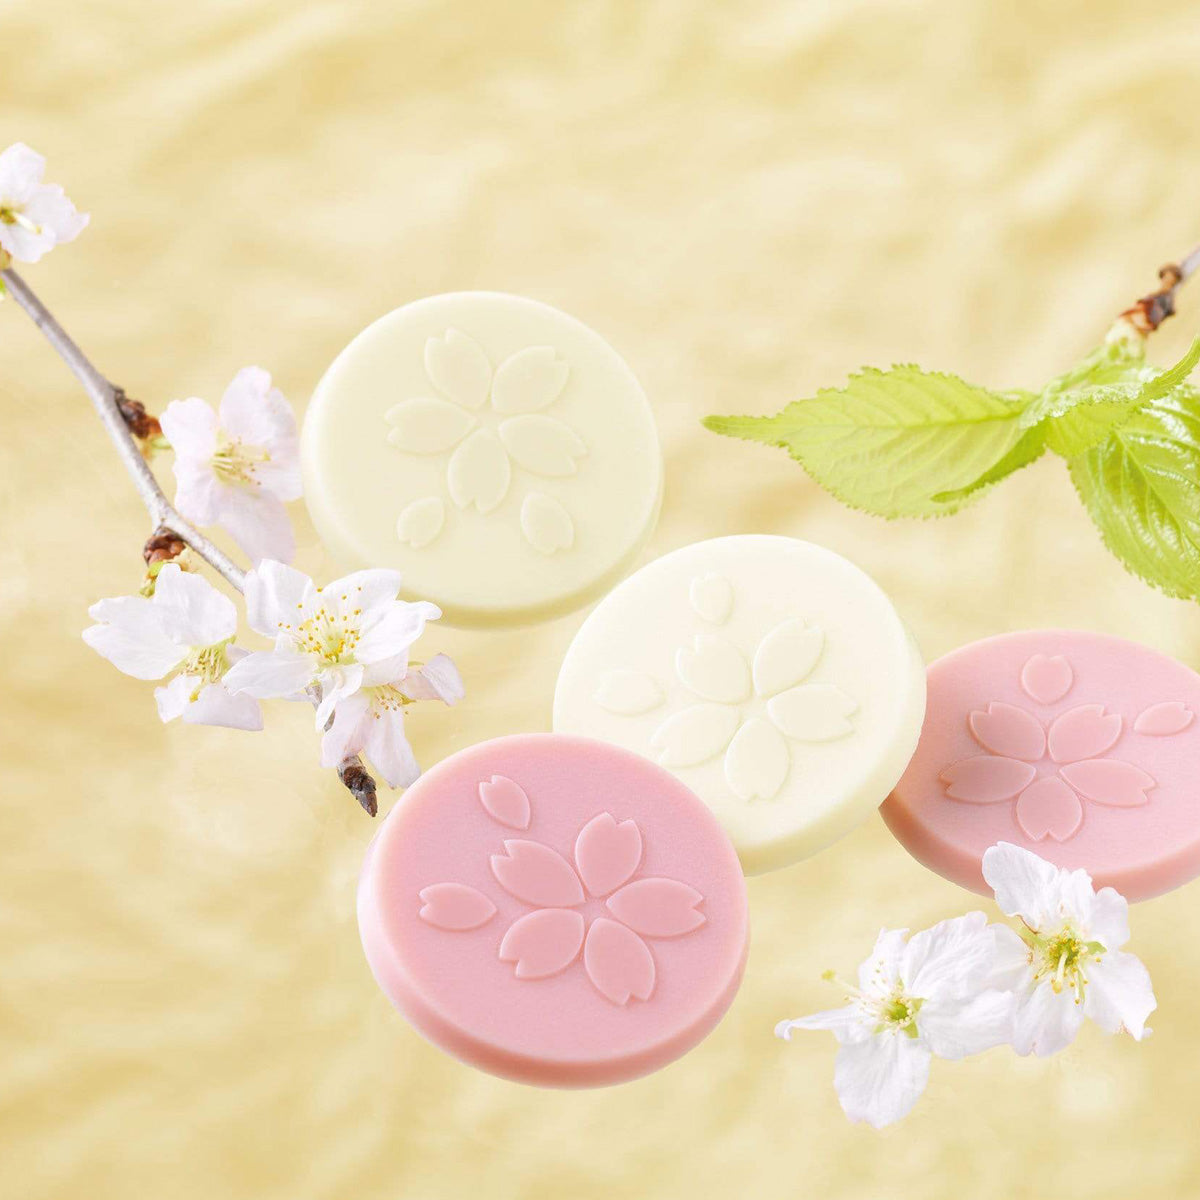 ROYCE' Chocolate - Sakuraberry & Sakurawhite Chocolate - Image shows pink and white chocolate discs with floral engravings. Accents include white flowers, a gray twig, and green leaves. Background is in yellow color.